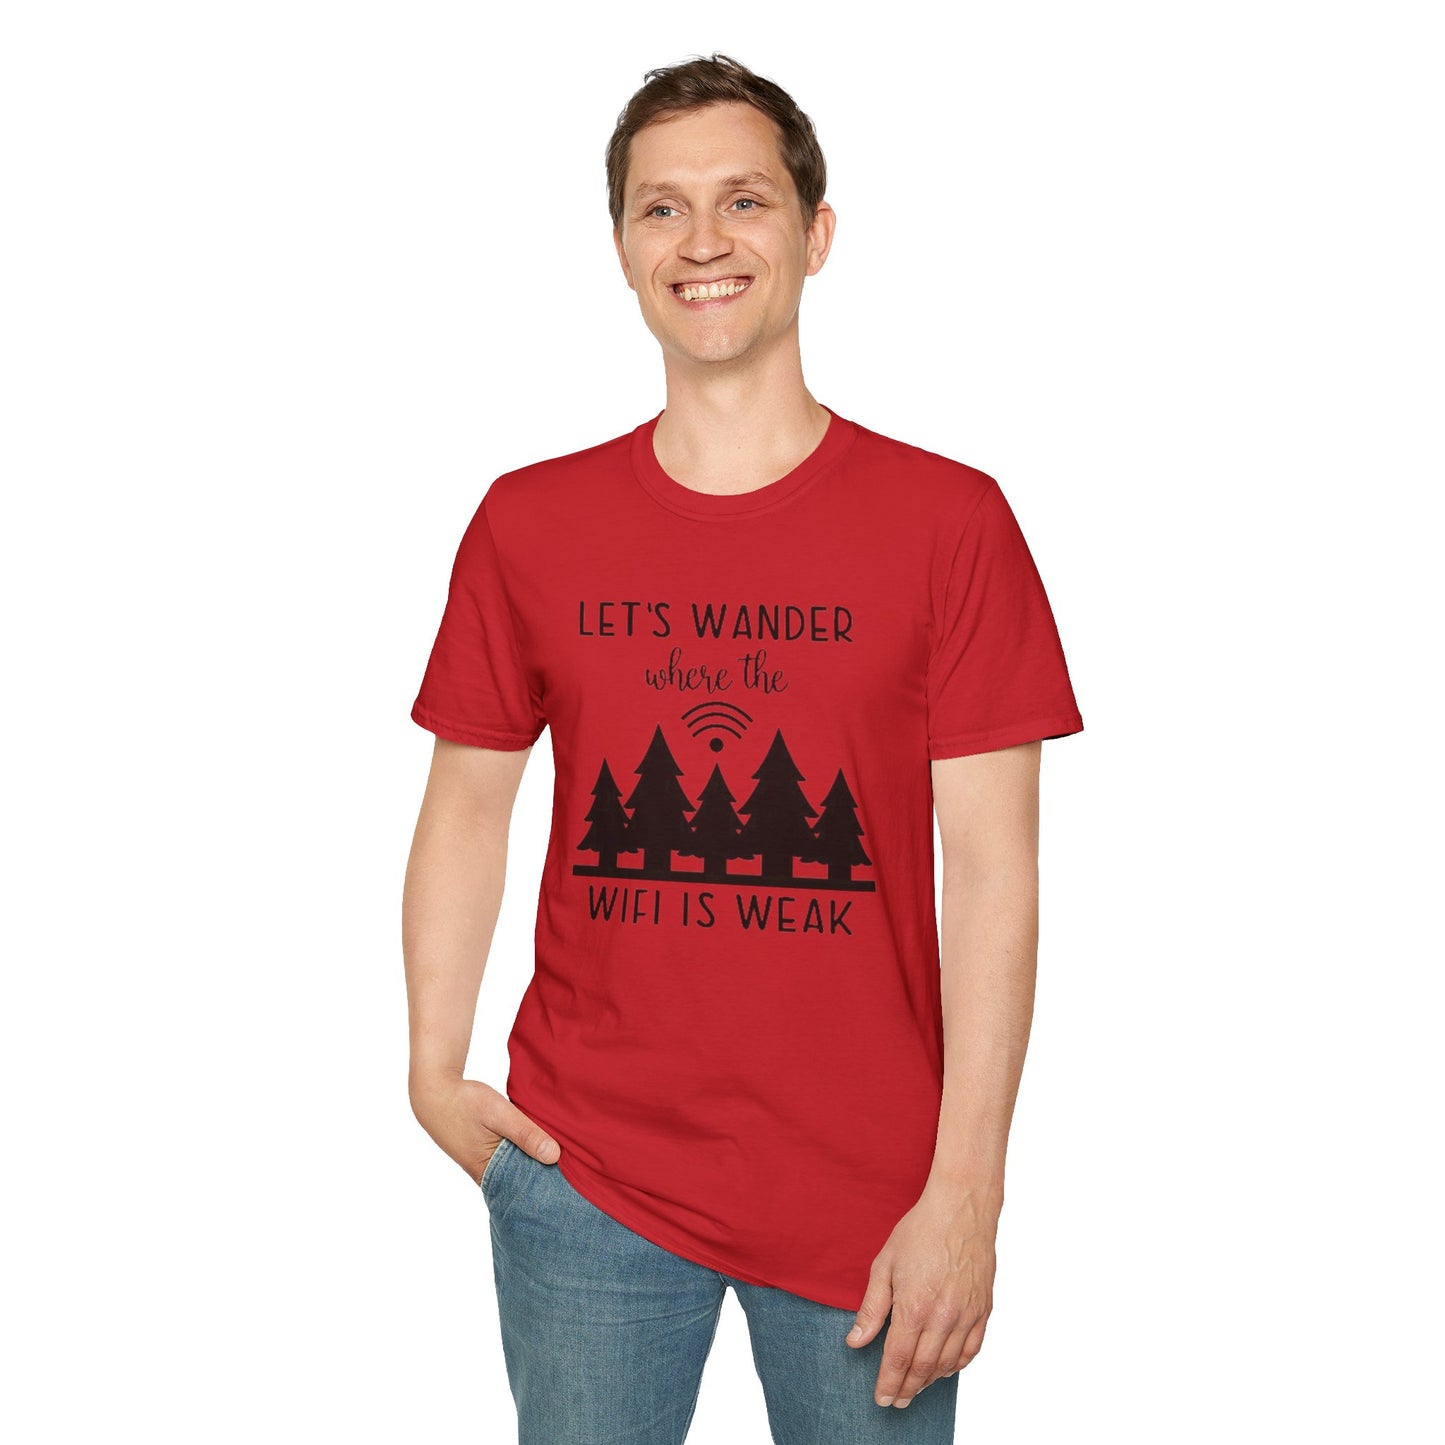 Lets wander where the WIFI is weak - Unisex Softstyle T-Shirt